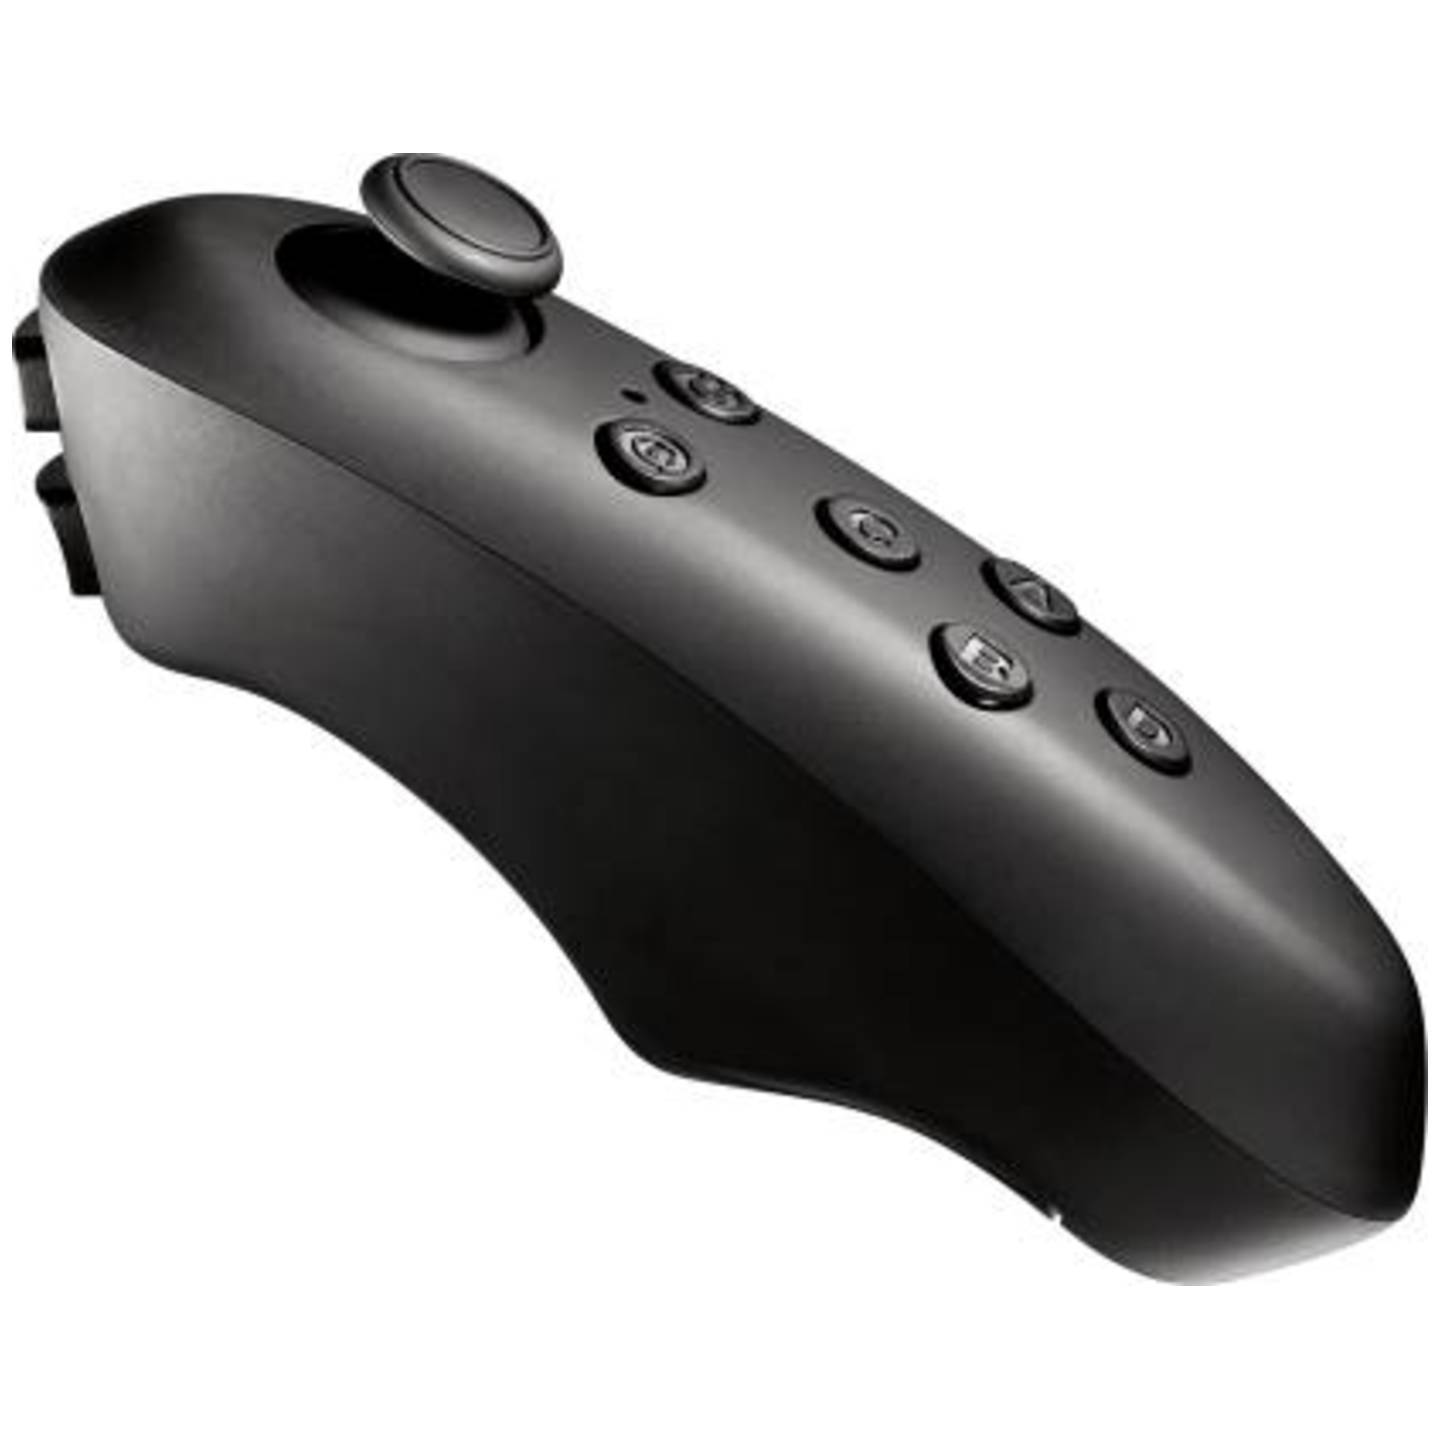 Umido TheaterMax VR Controller